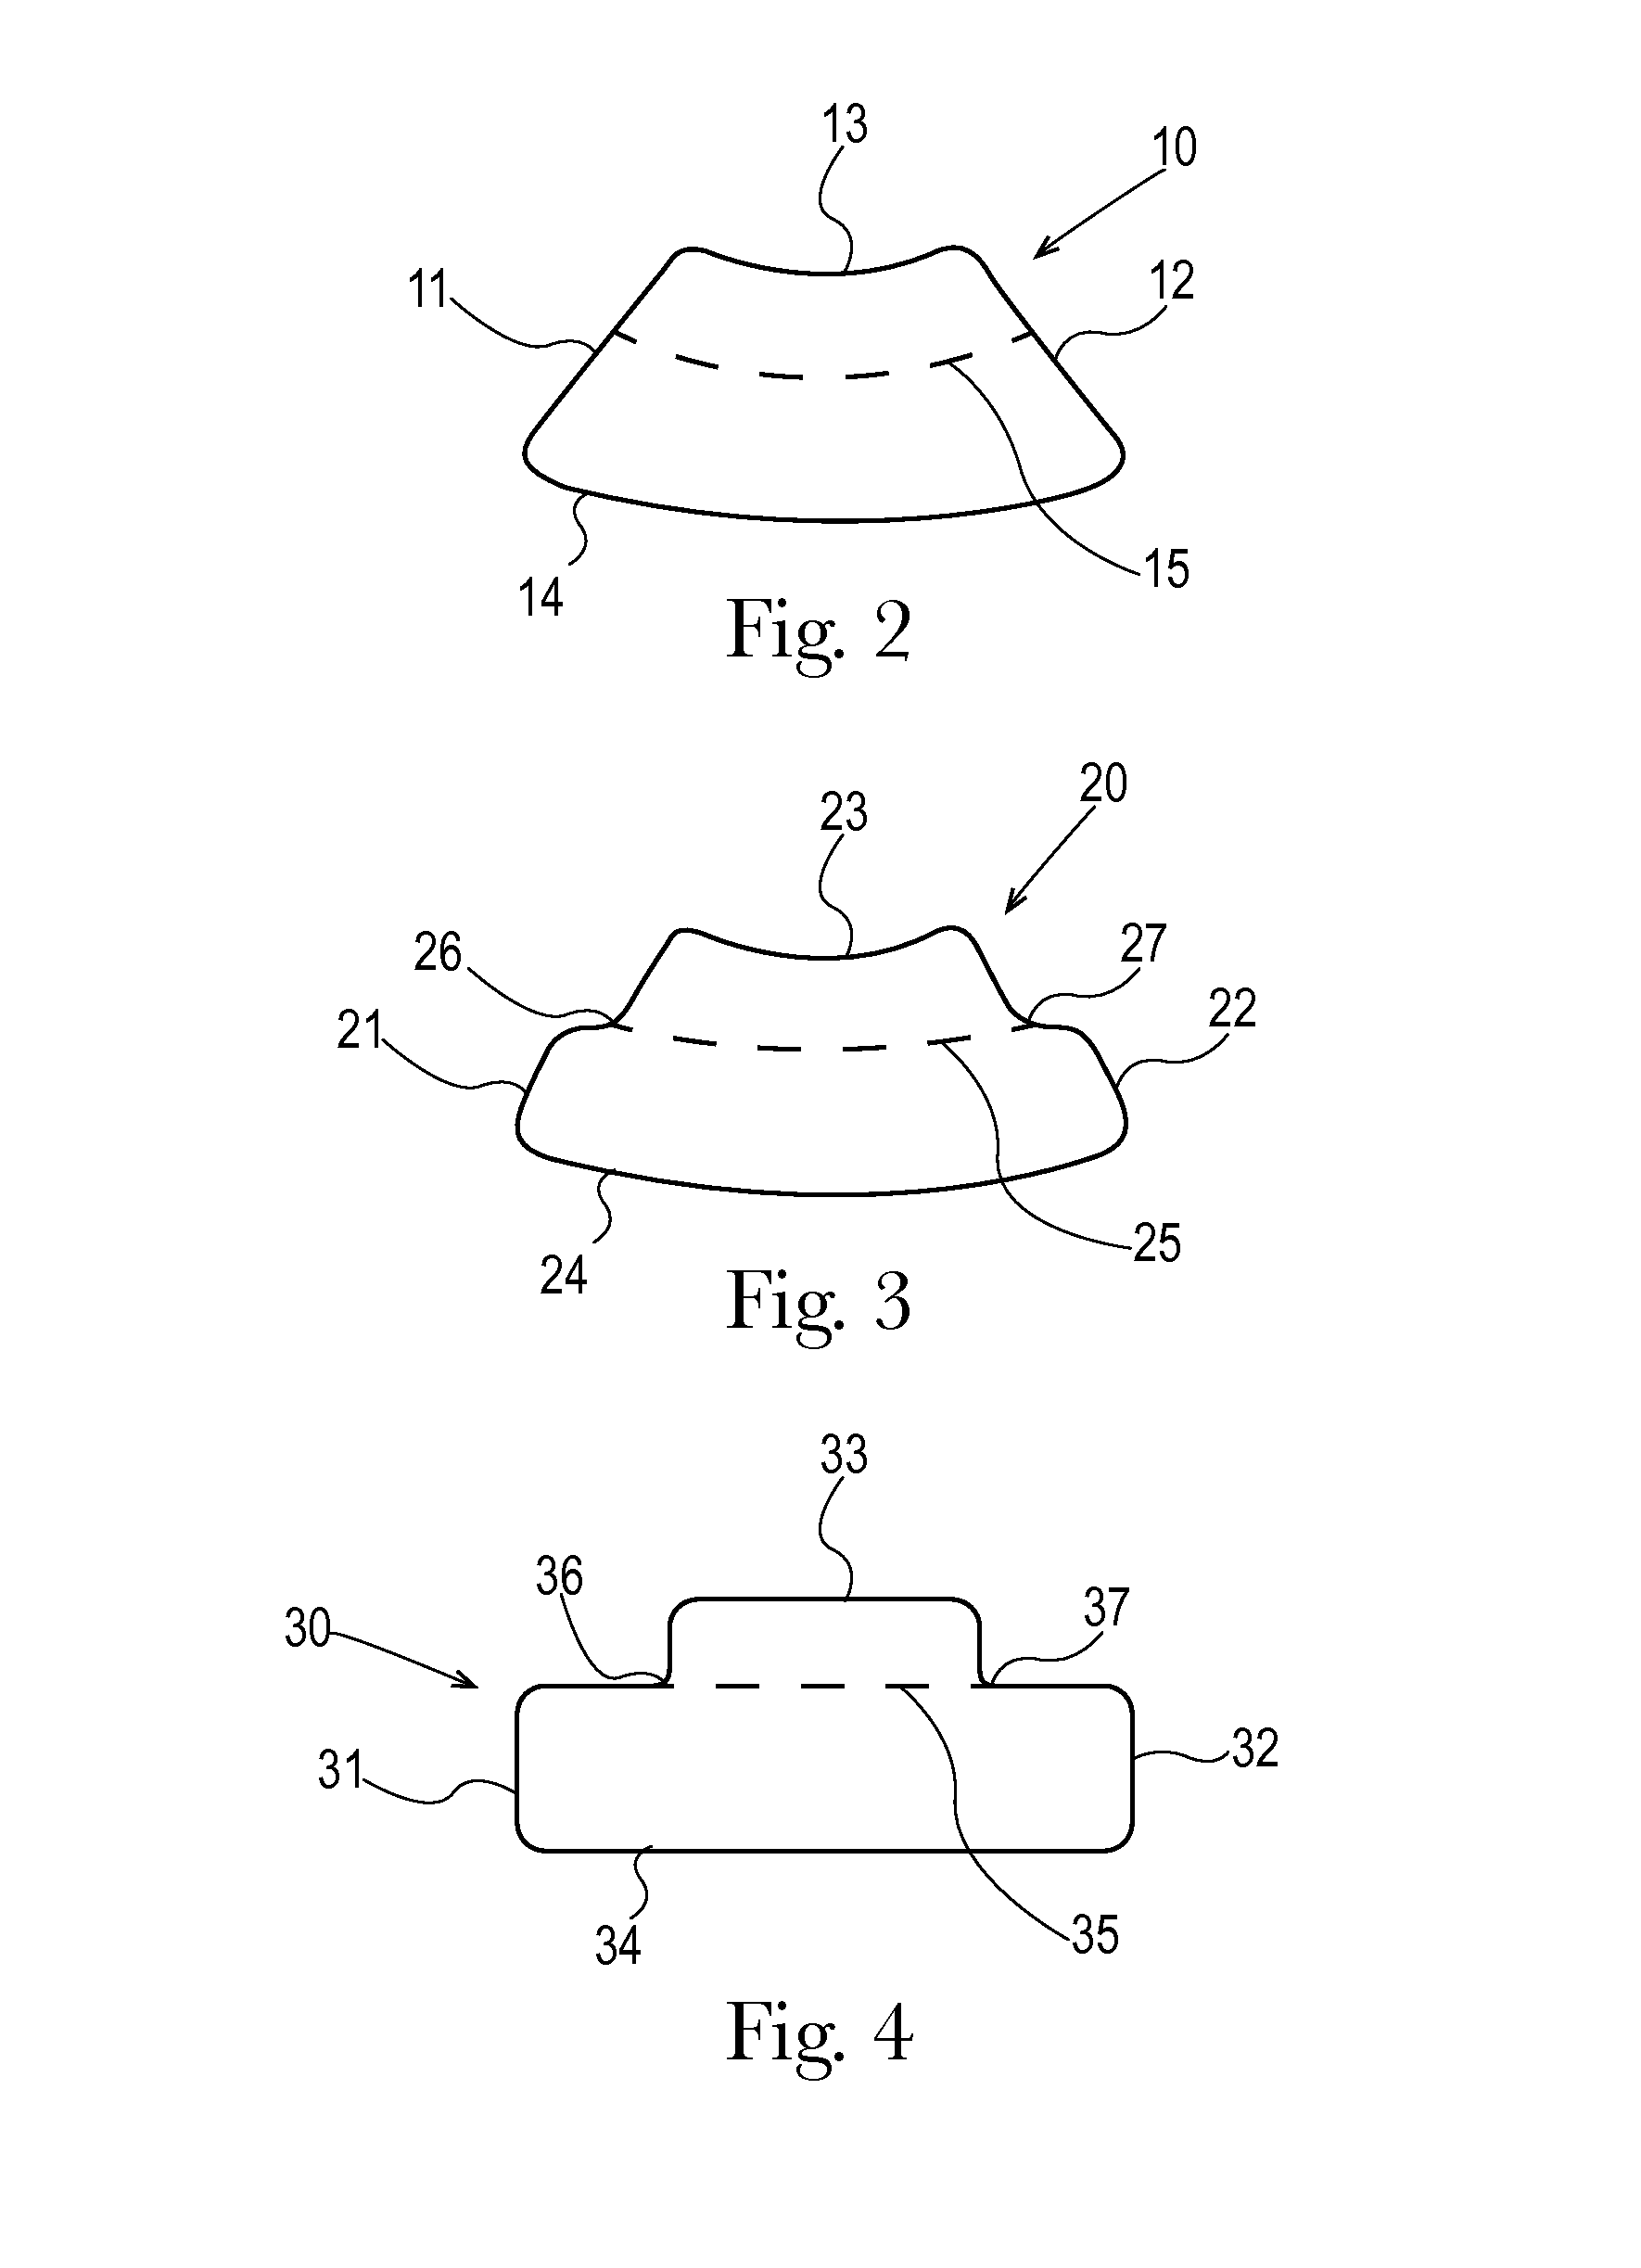 Strip For The Delivery Of An Oral Care Active And Methods For Applying Oral Care Actives